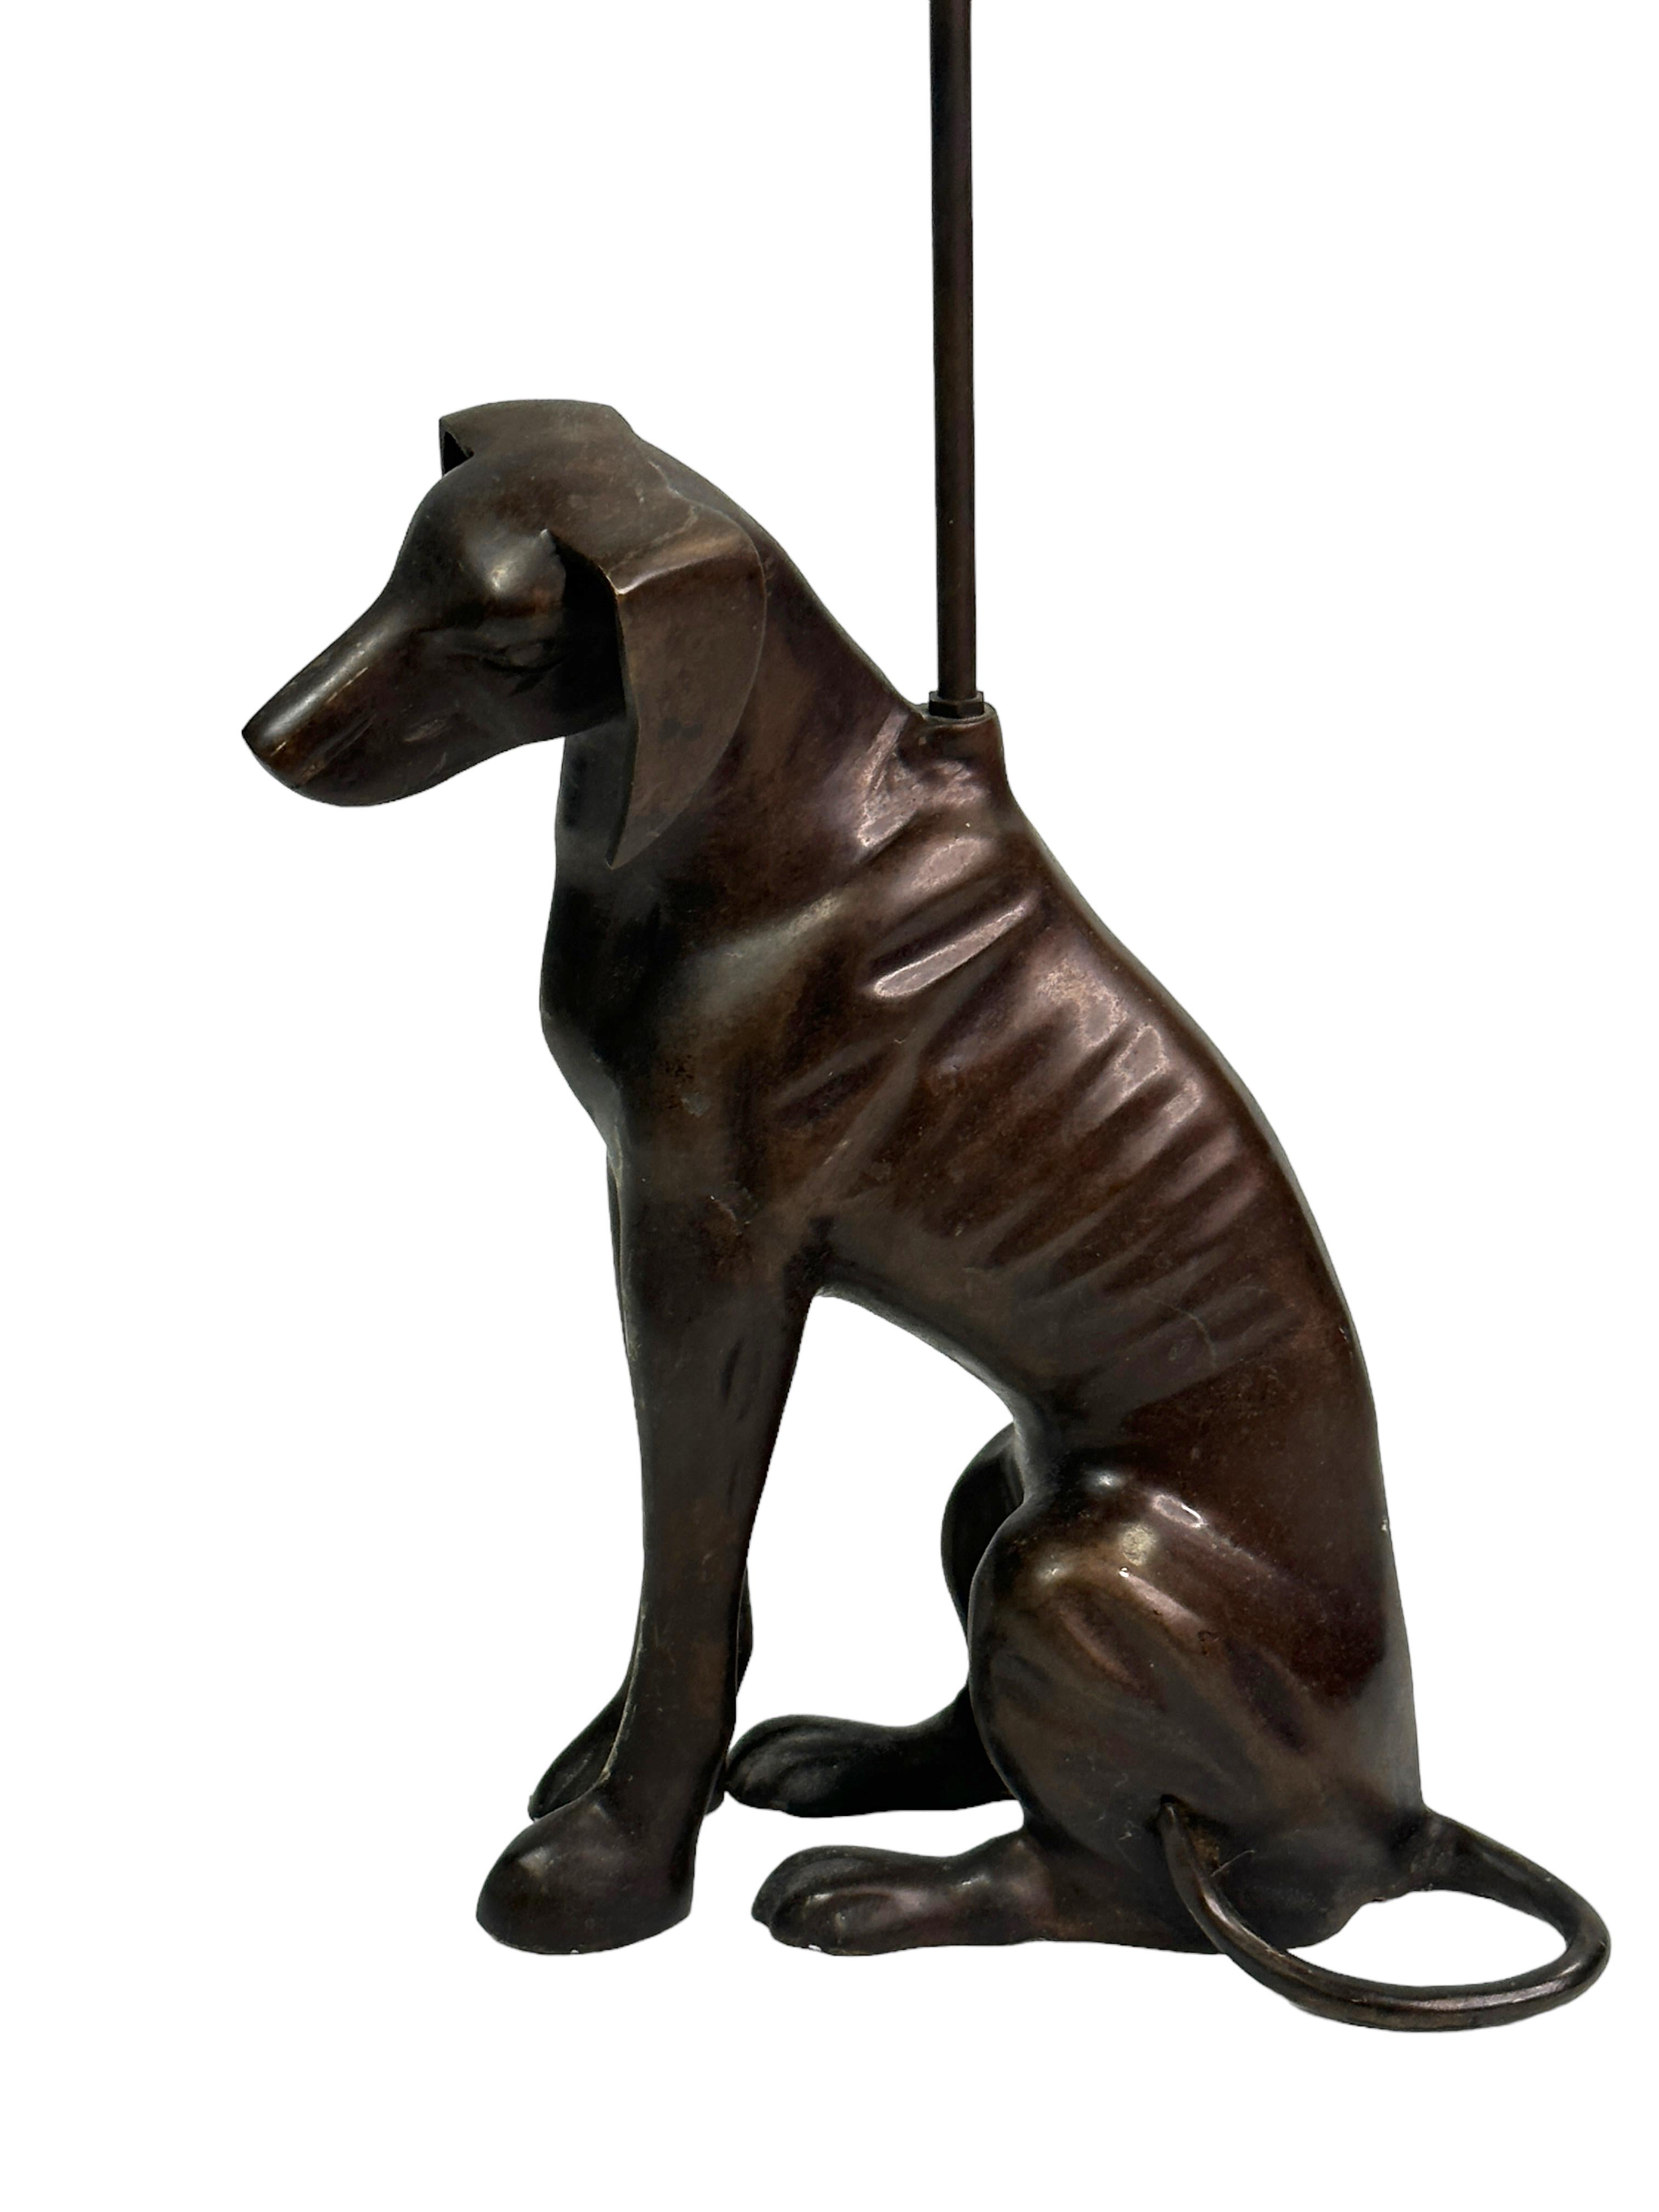 A beautiful and substantial Art Deco style bronze whippet or greyhound dog sculpture door stand measuring totally 19.13